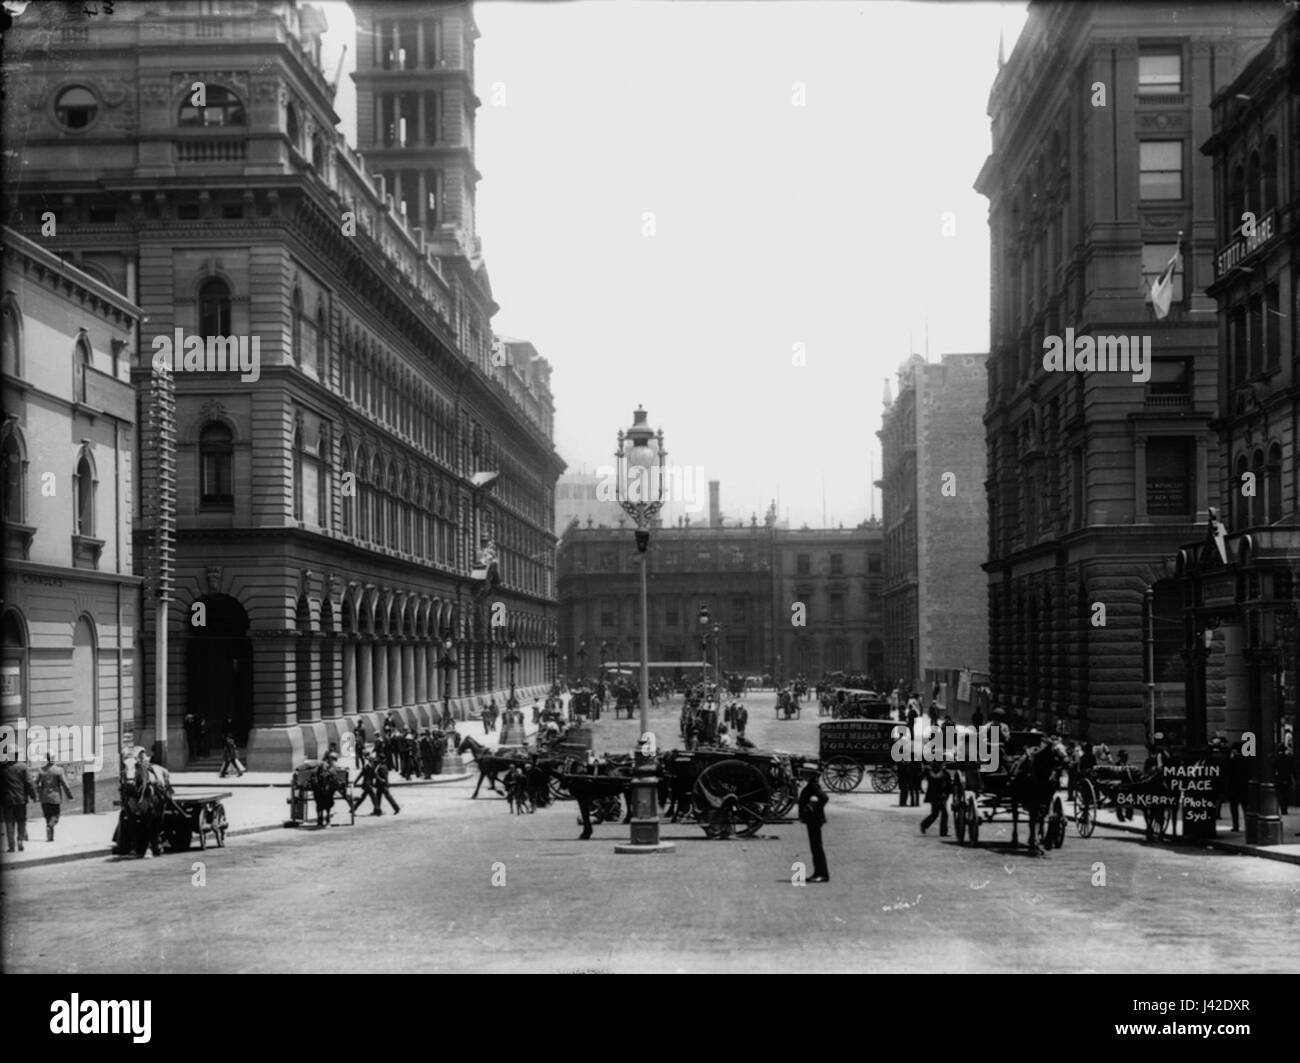 Martin Place from The Powerhouse Museum Collection Stock Photo